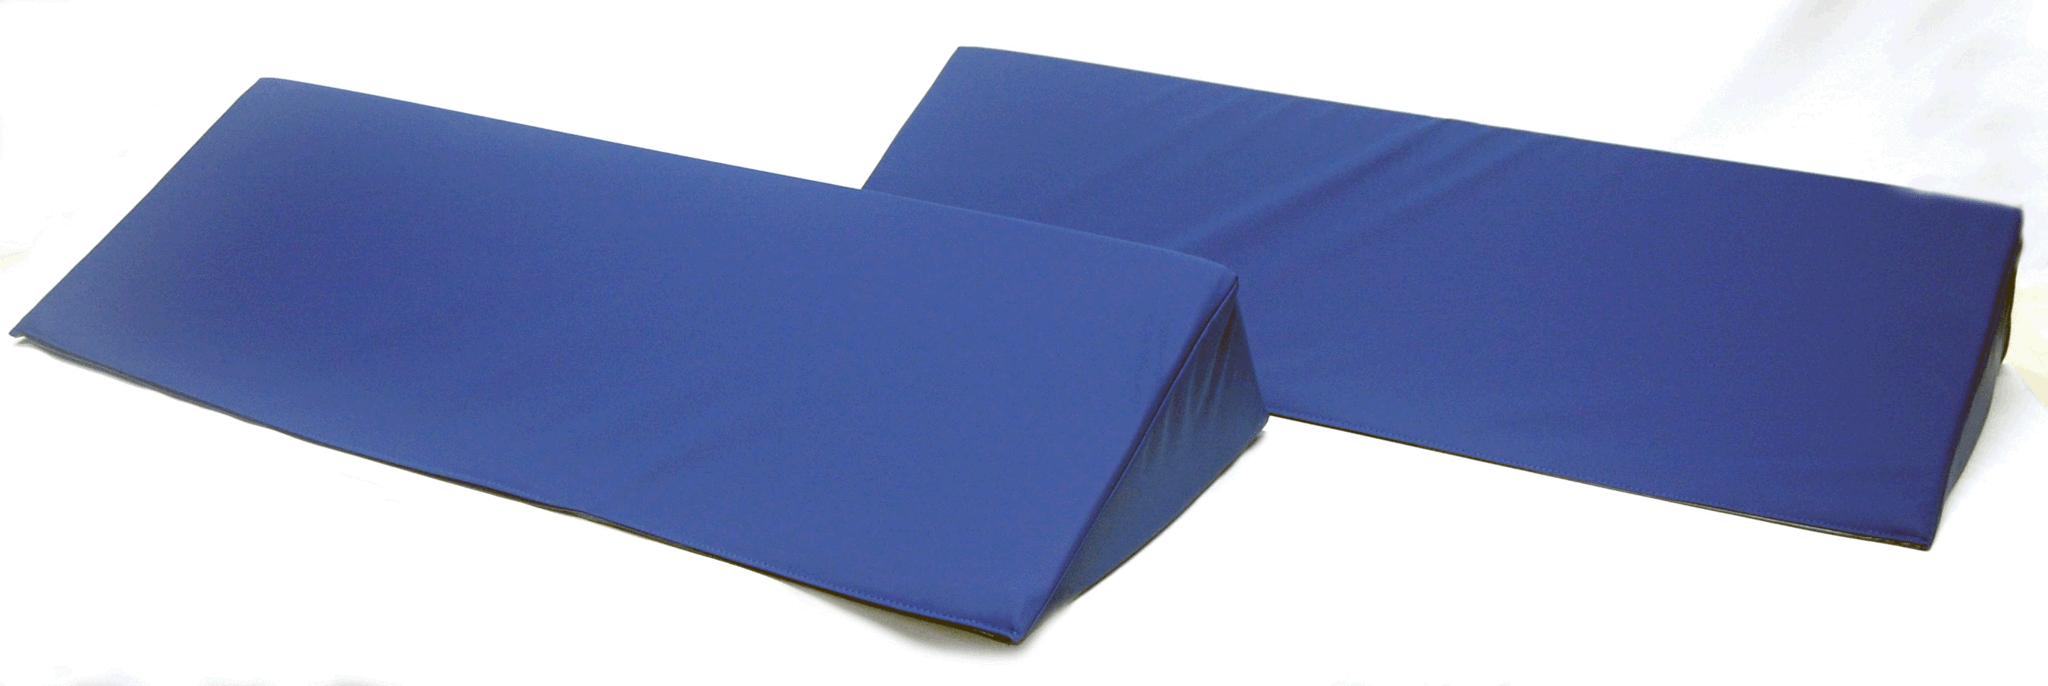 30 Degree Positioning Wedge - Positioning Aids - Cushions